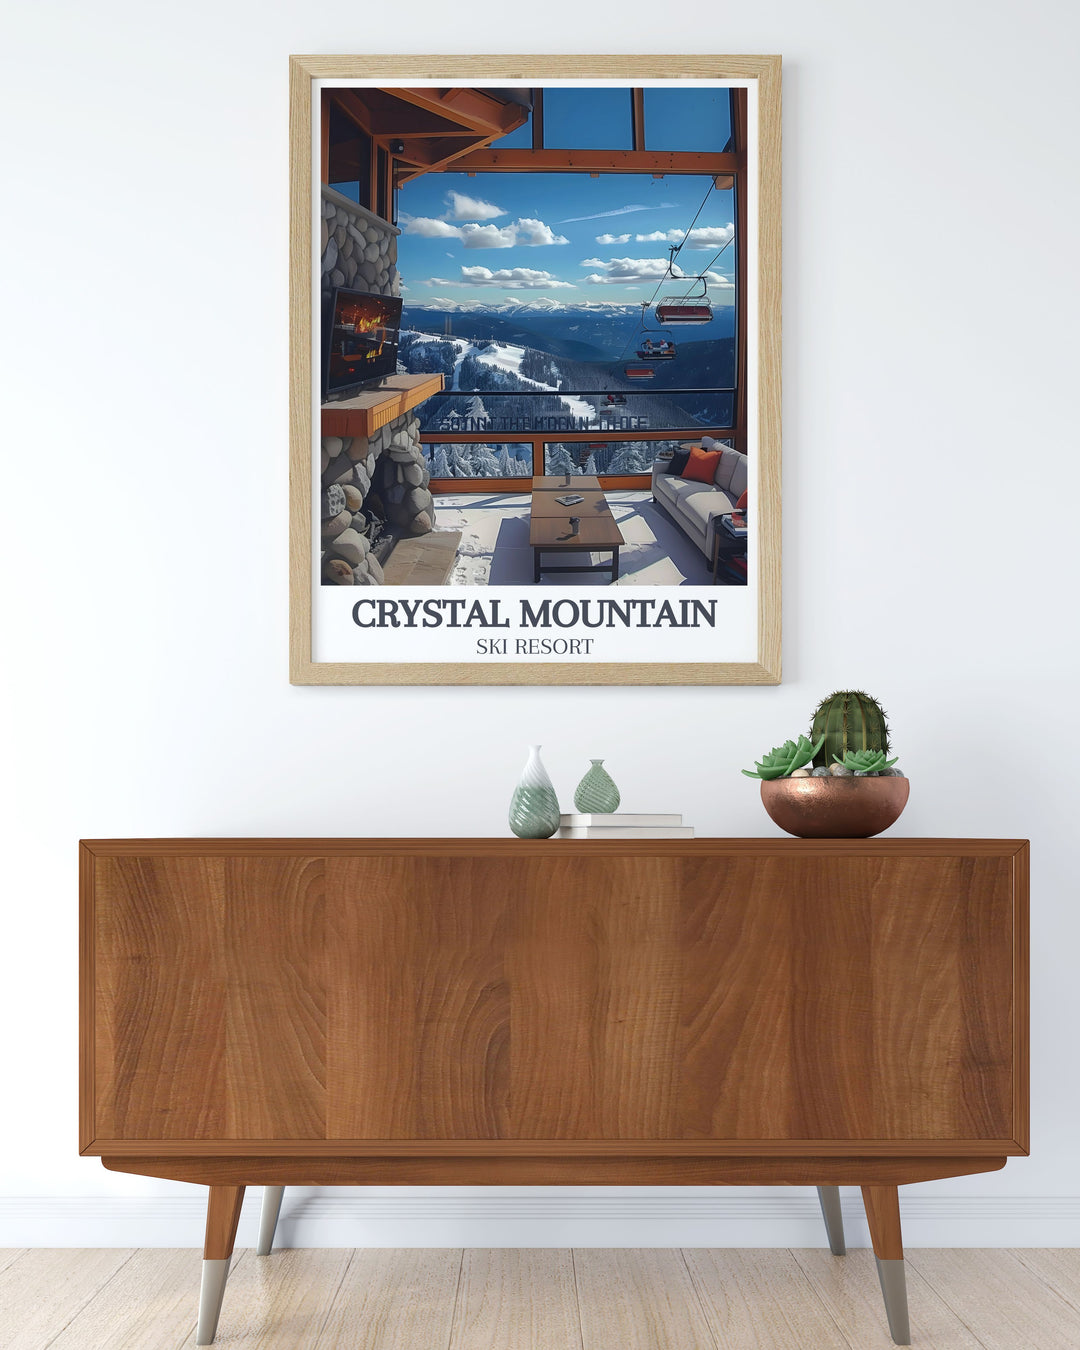 Framed art illustrating the majestic landscapes of Crystal Mountain and the Cascade Range, ideal for enhancing any room with natural beauty.